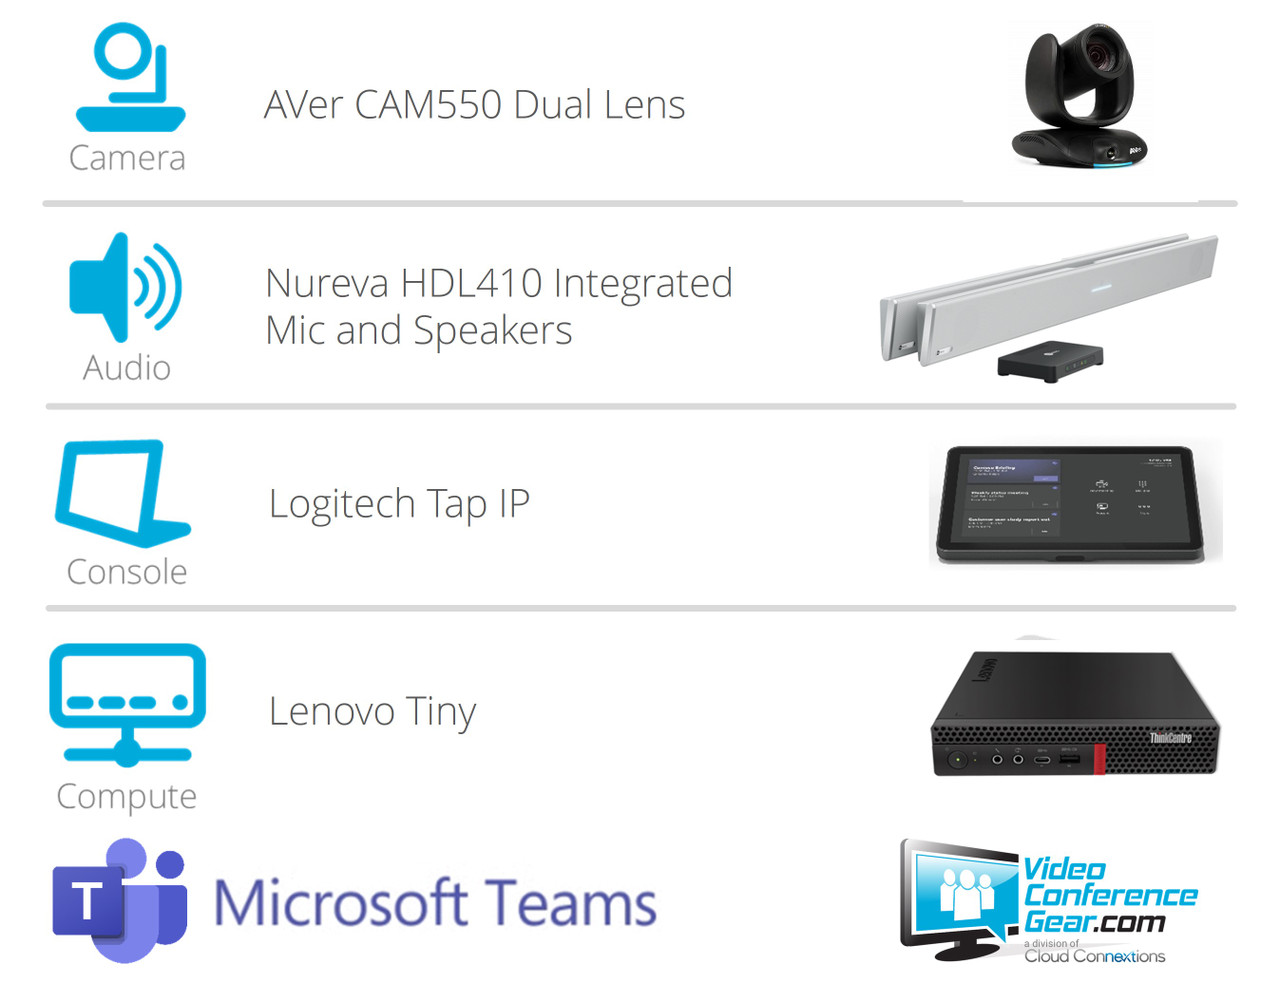 Microsoft Teams Rooms Solution with AVer CAM550 and Nureva HDL410 (White) Large Room